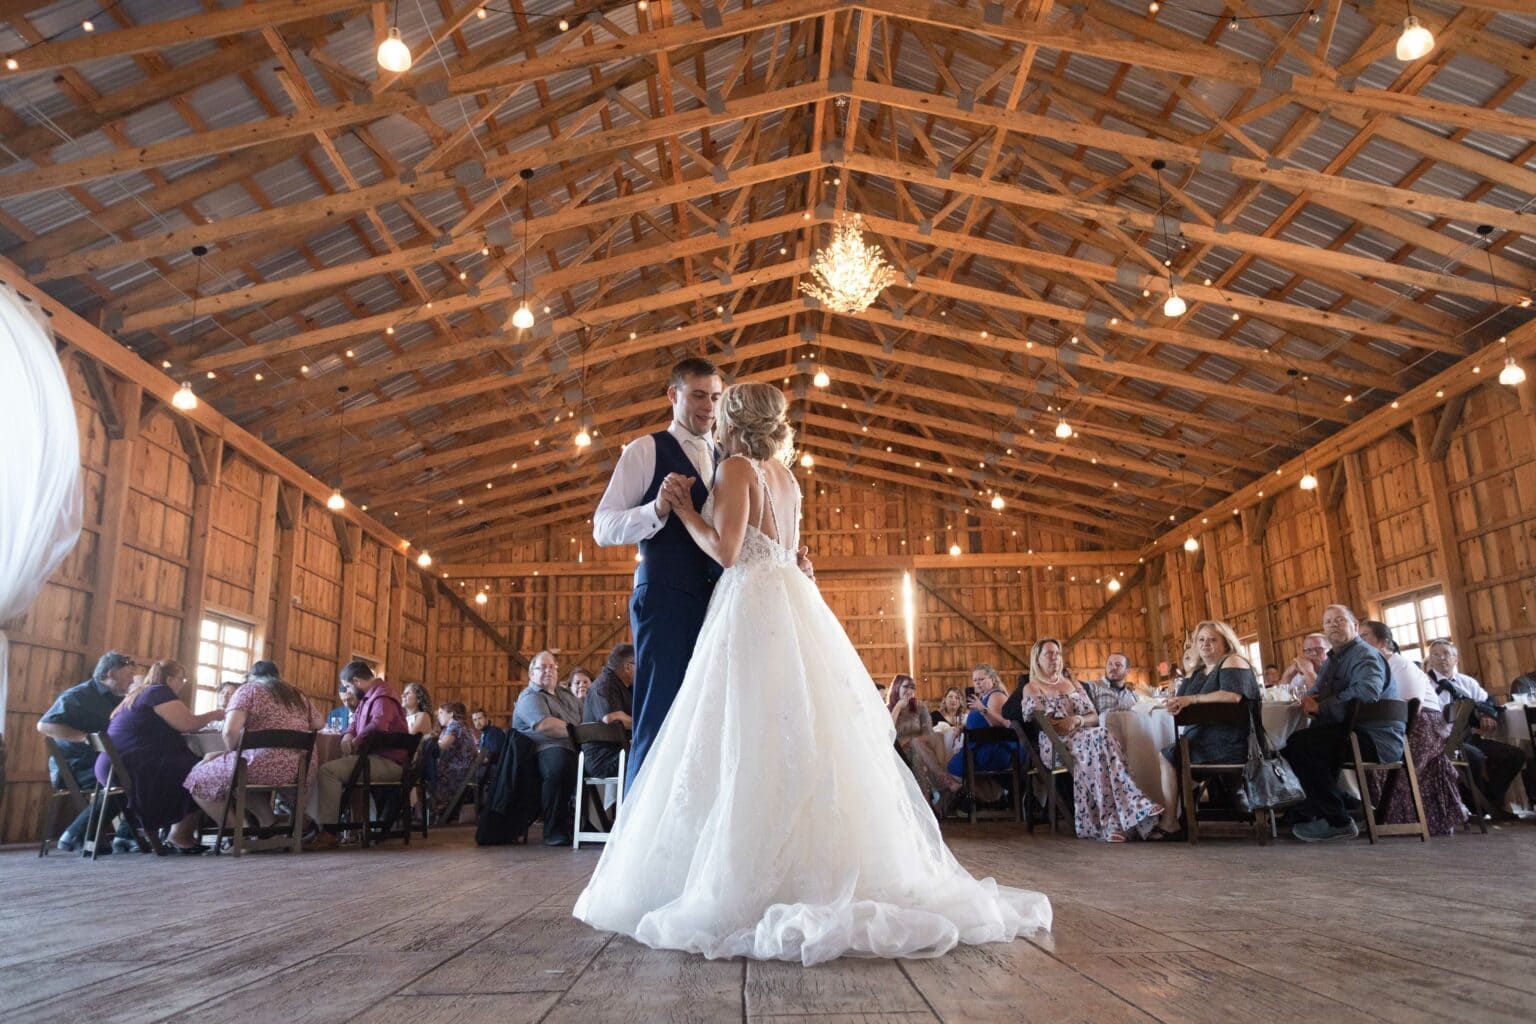 A bride and groom are dancing in a barn at their wedding reception.